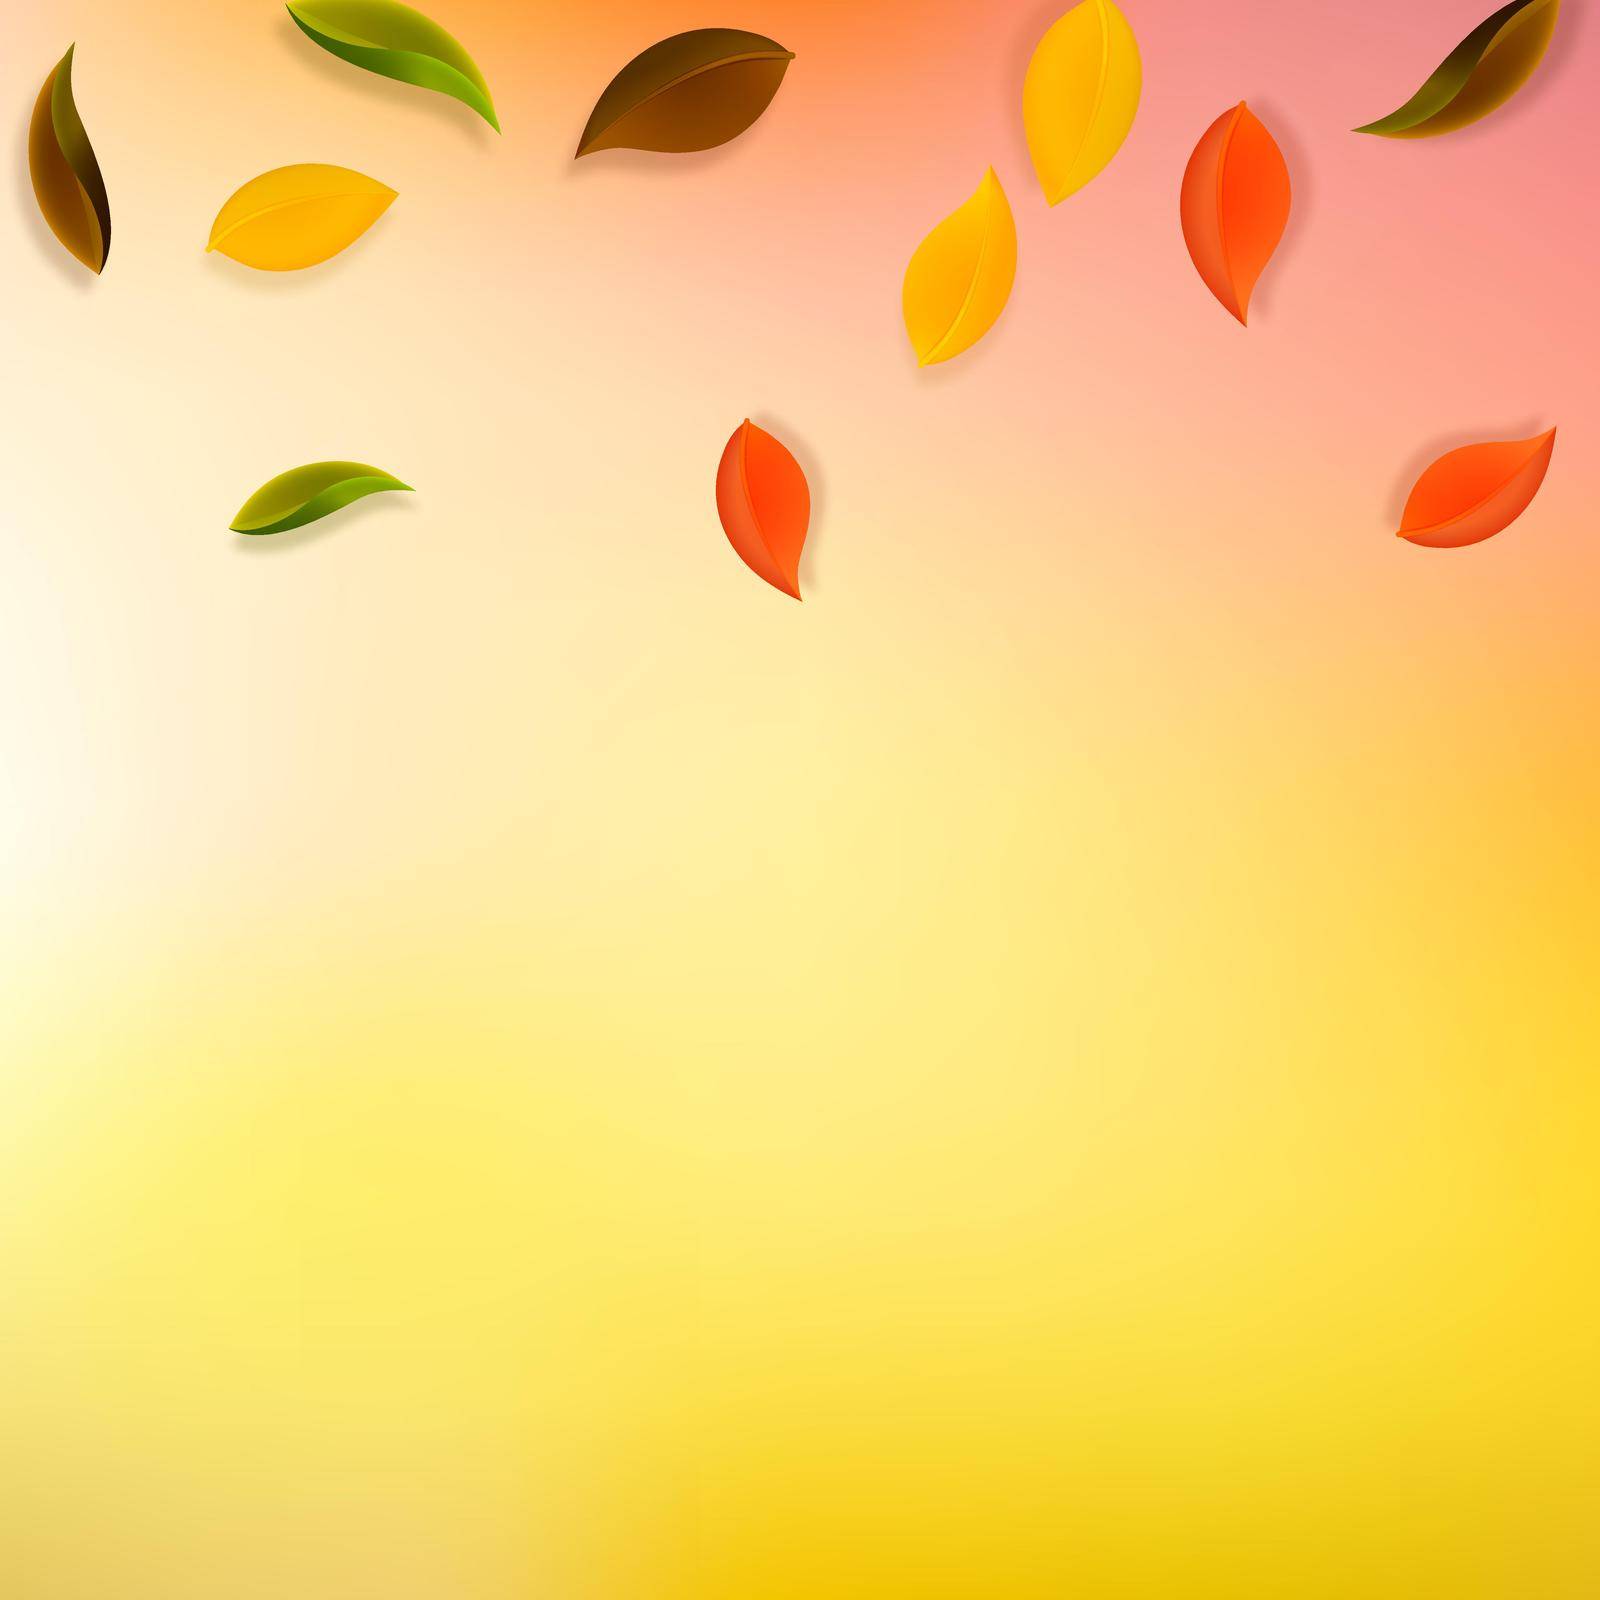 Falling autumn leaves. Red, yellow, green, brown neat leaves flying. Gradient colorful foliage on indelible white background. Awesome back to school sale.